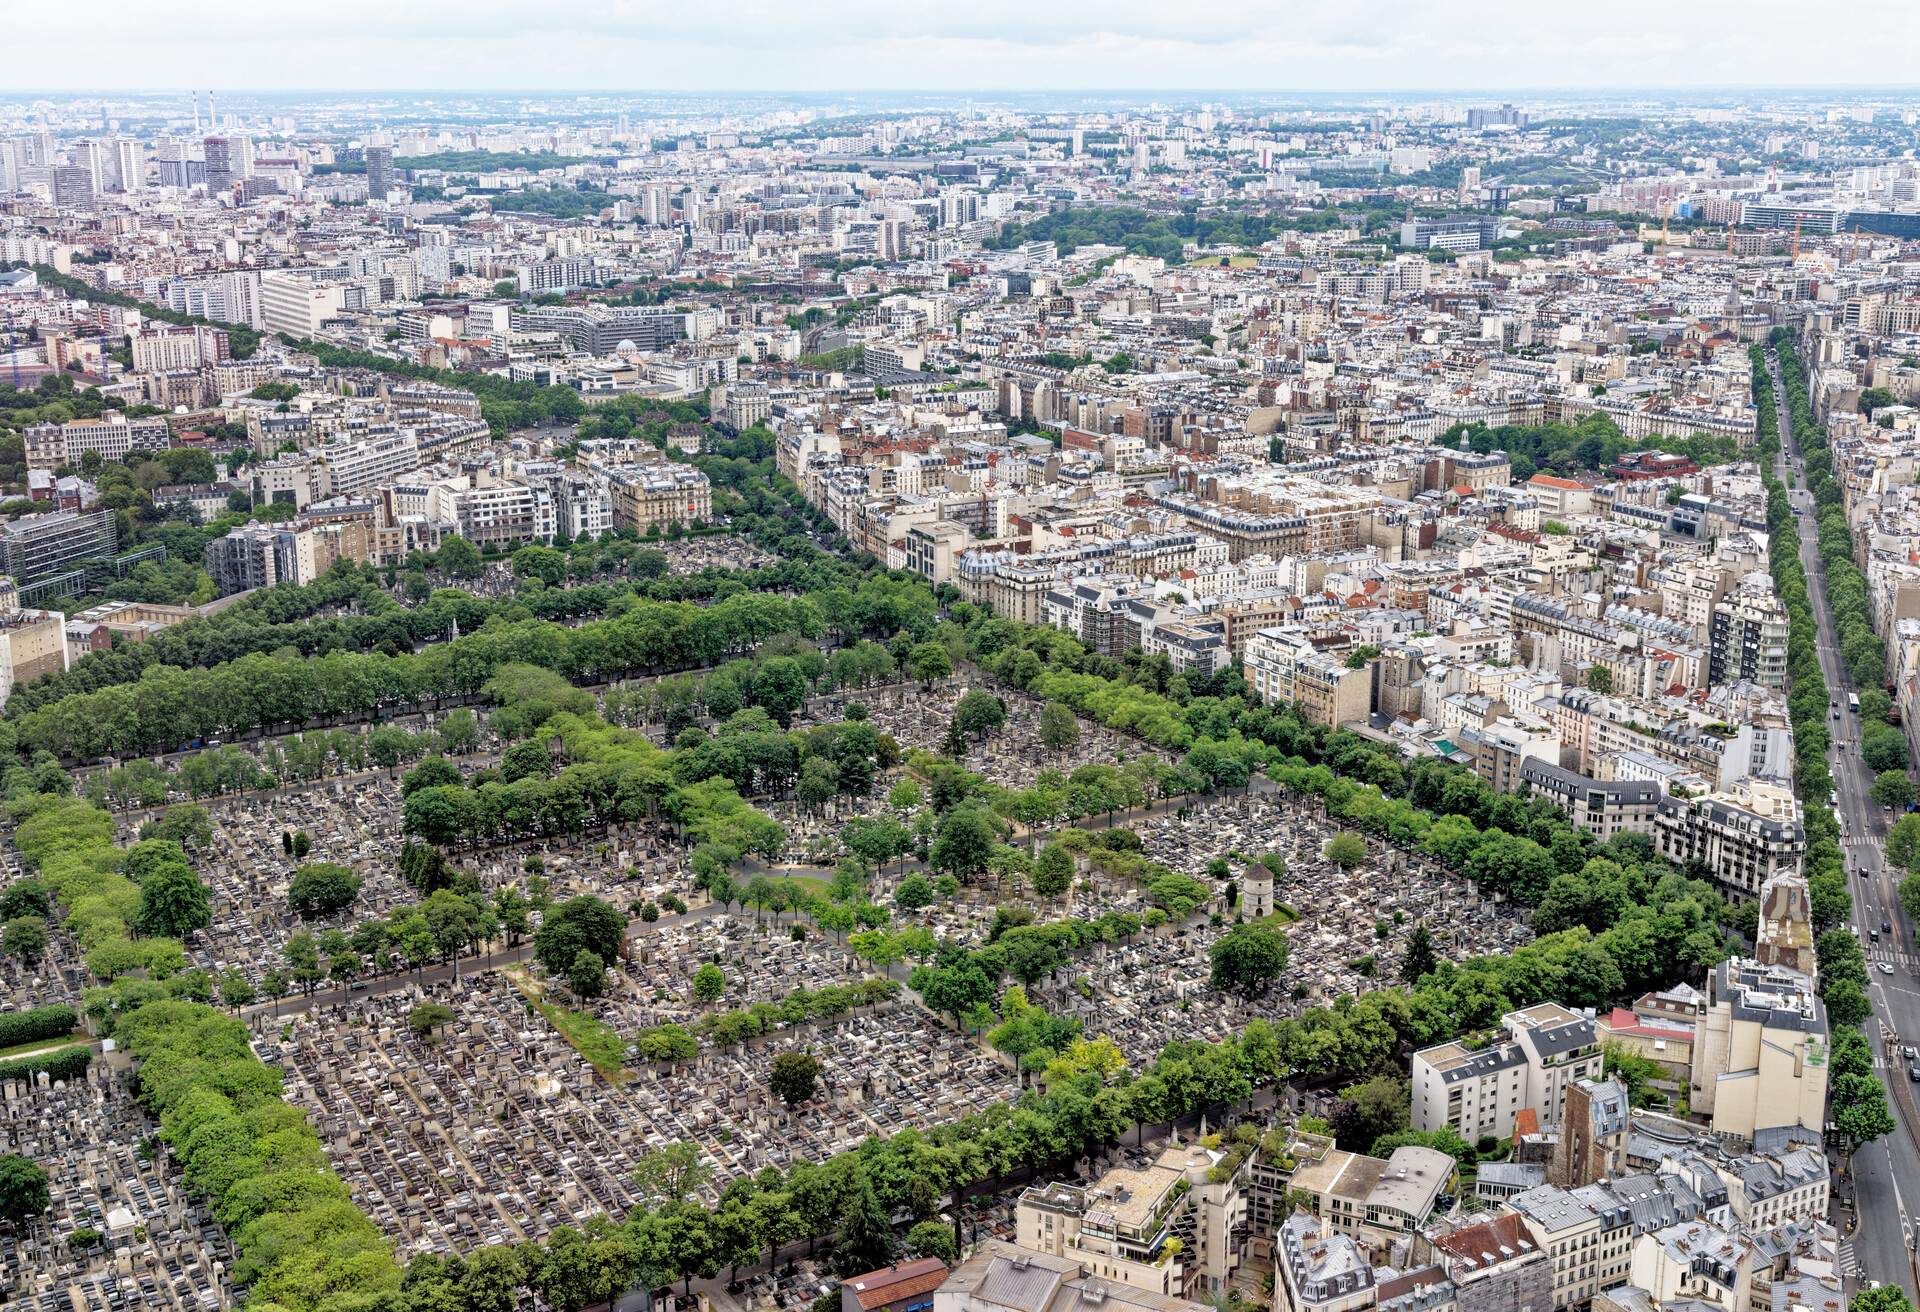 View over Pere - Lachaise Cemetery Paris from the observation deck at the top of the Tour Montparnasse, Paris, France